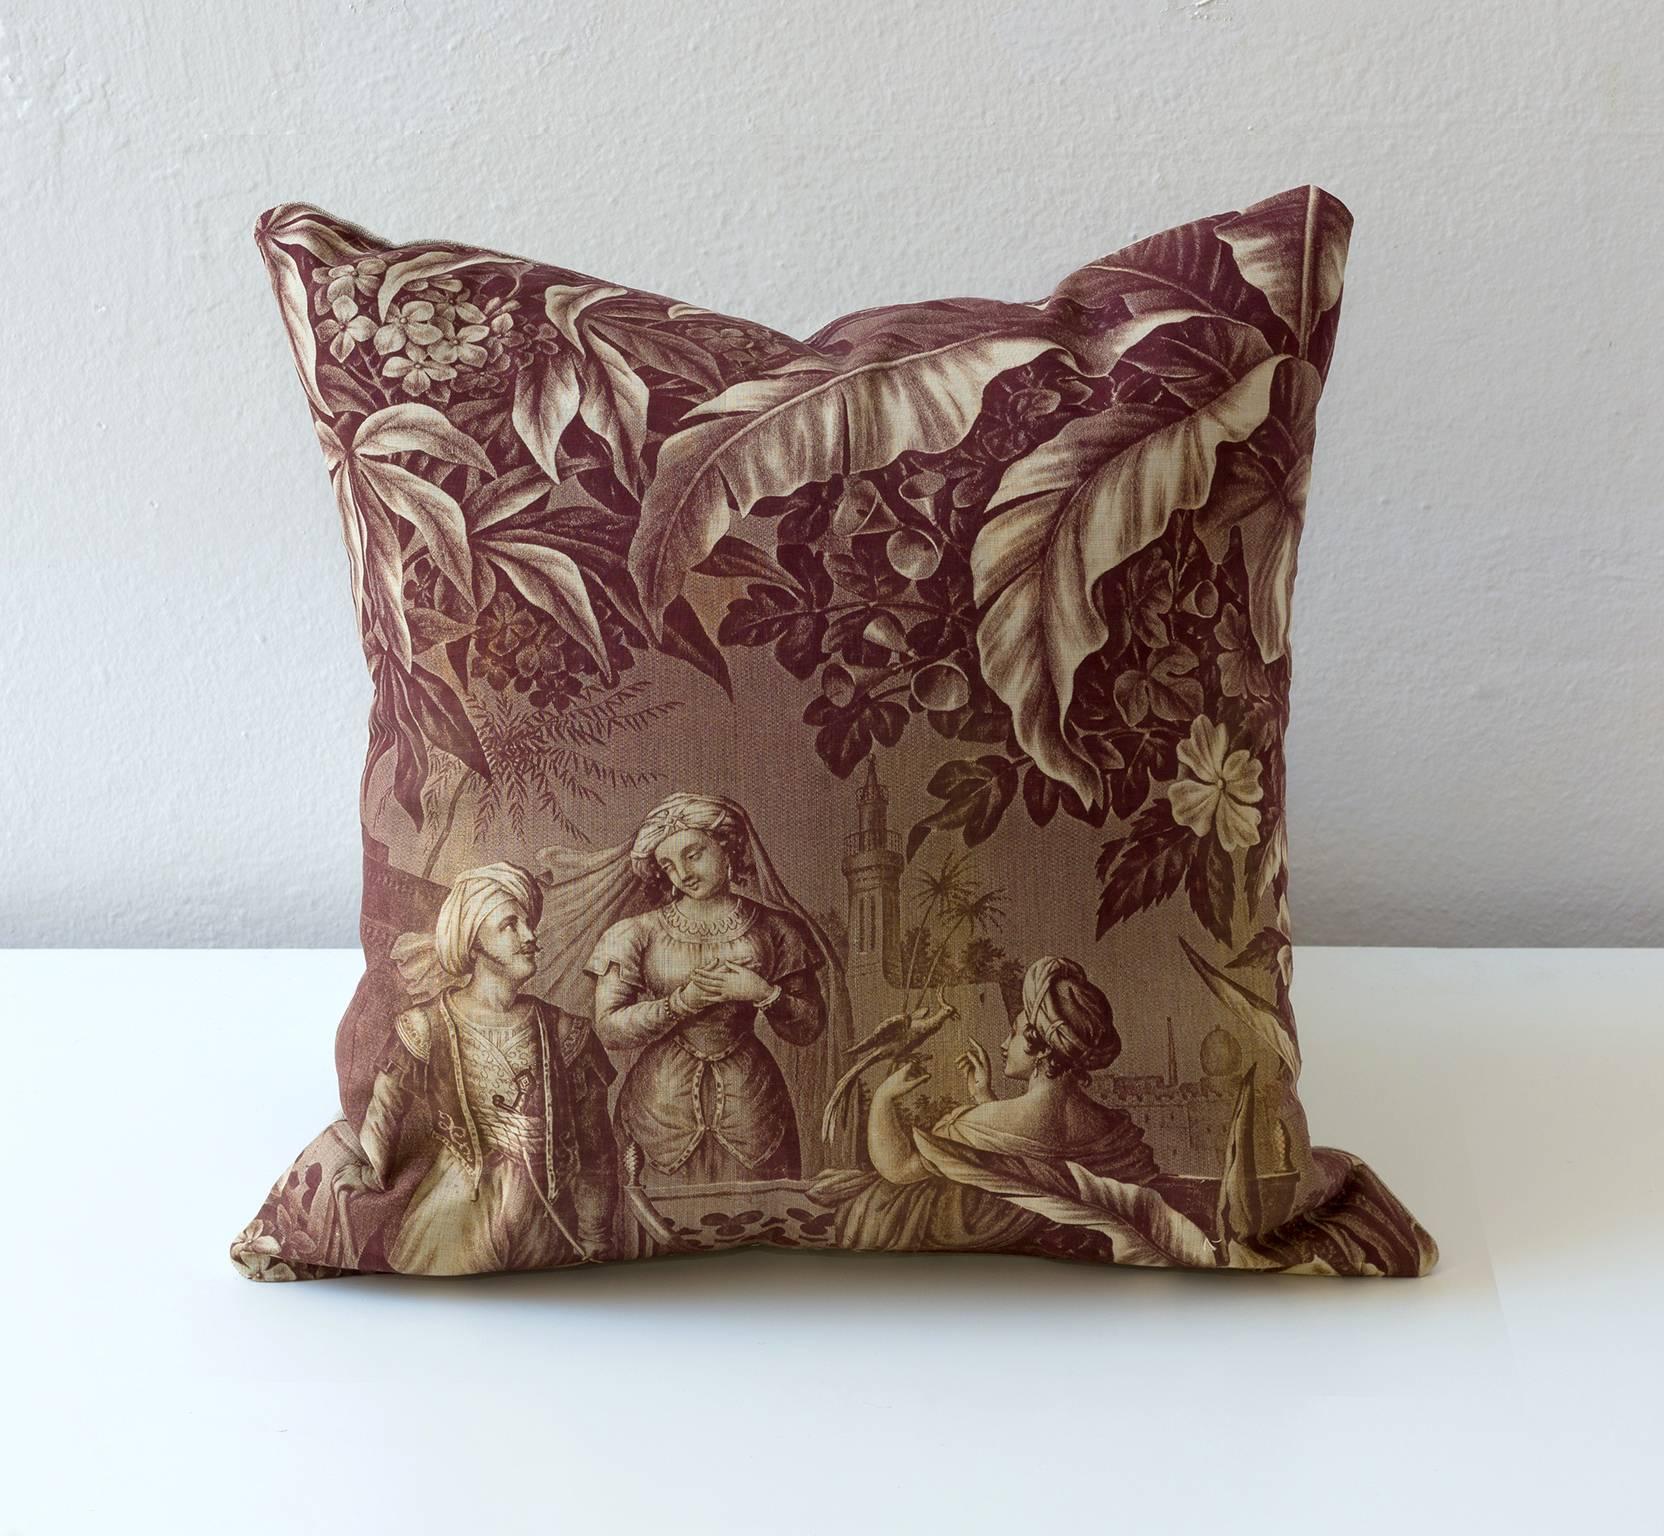 A scene of a reclining turbaned figure with friends under lush foliage. A classic puce Toile de Nantes color. A set sold individually 

Linen on reverse--see image
75/25 goose feather and down inserts.
Handsewn closure.
Check our 1stdibs